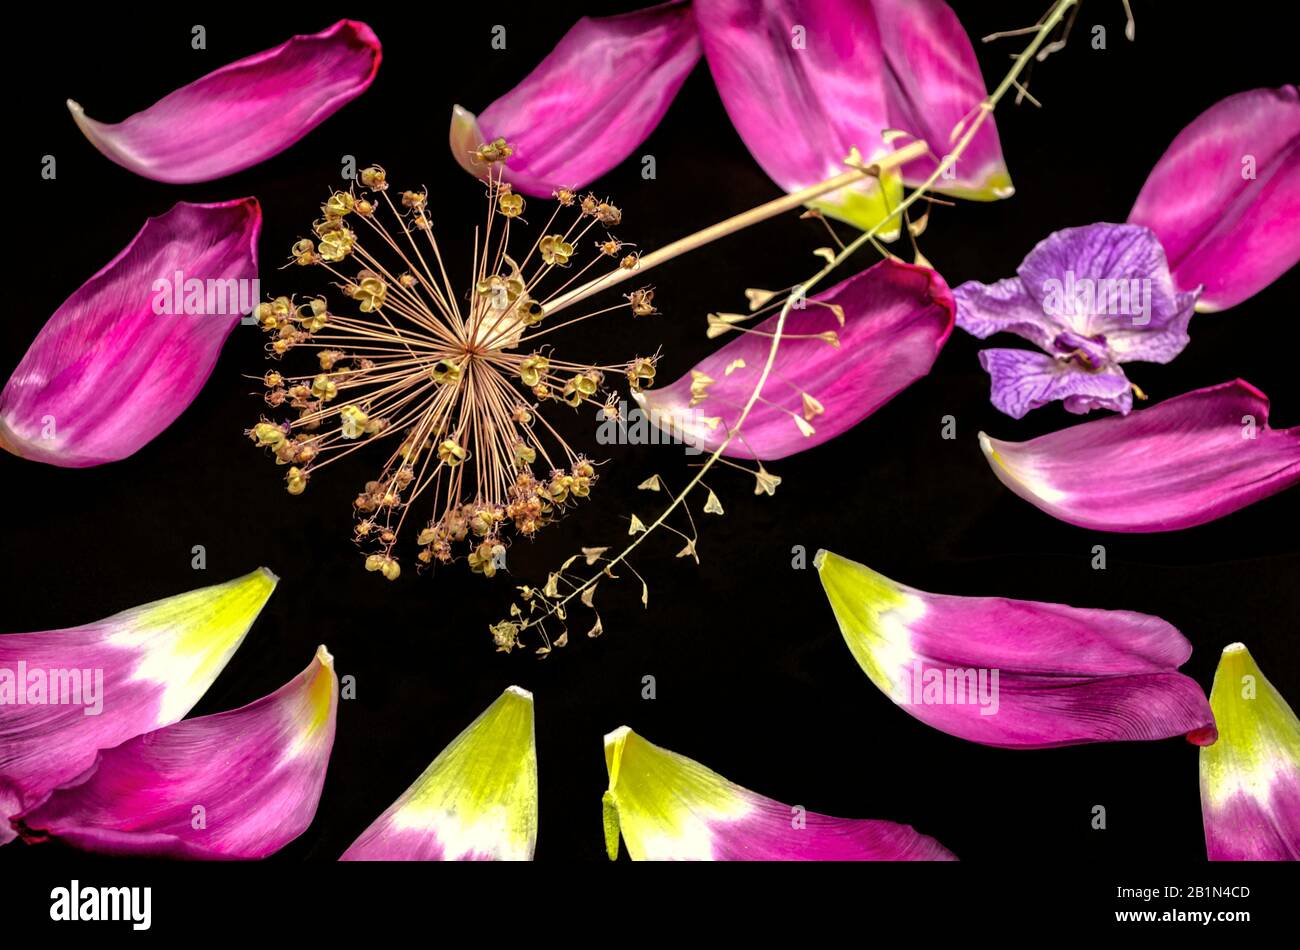 Black background with a dry sprig of decorative Allium,fading orchid,a dry branch of a shepherd's bag and studded with shiny large purple petals with Stock Photo